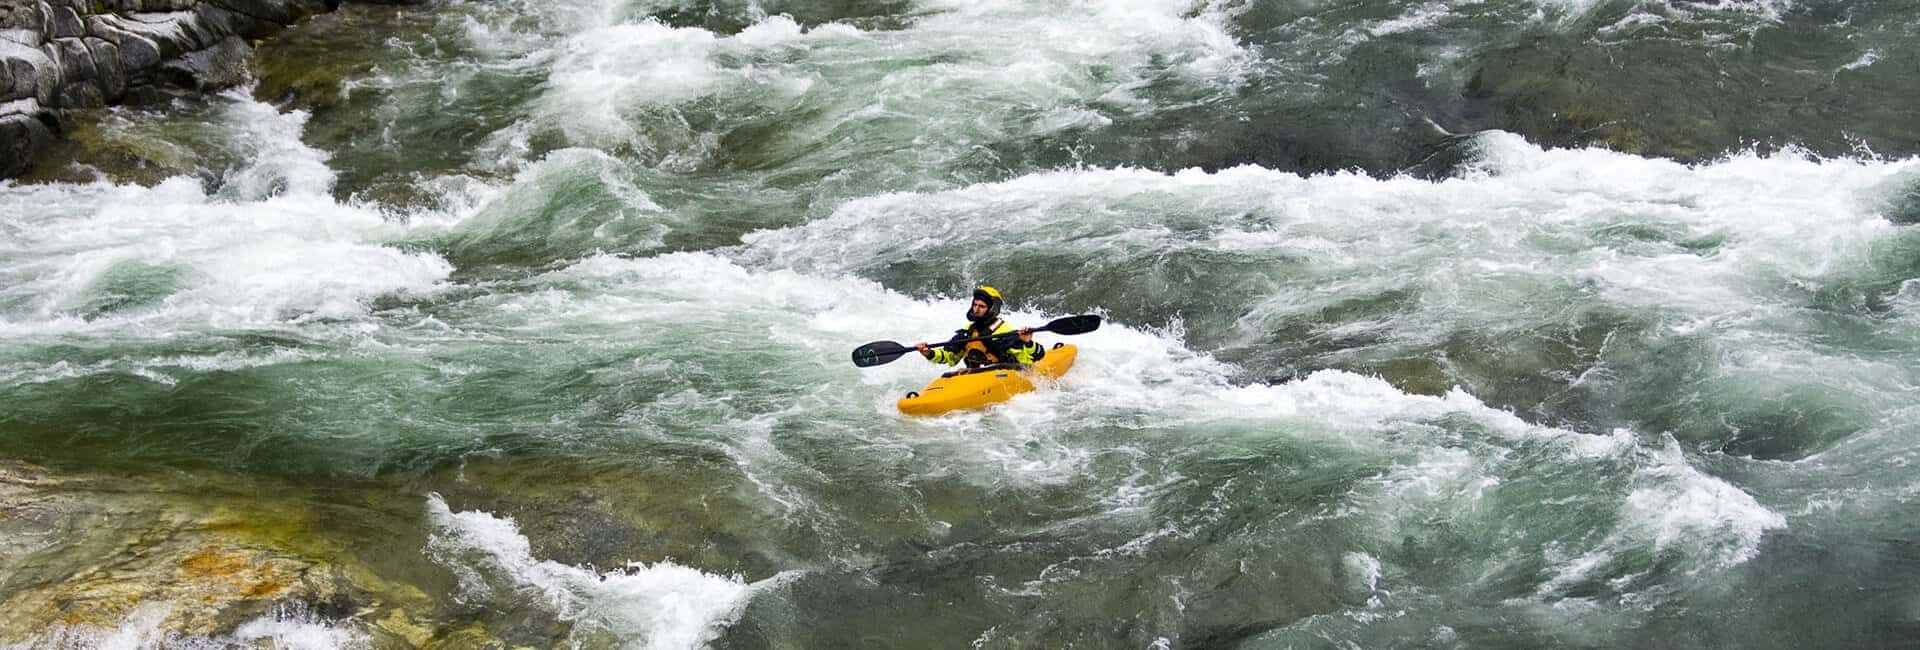 The Ocoee Rivers Preferred Whitewater Outfitter